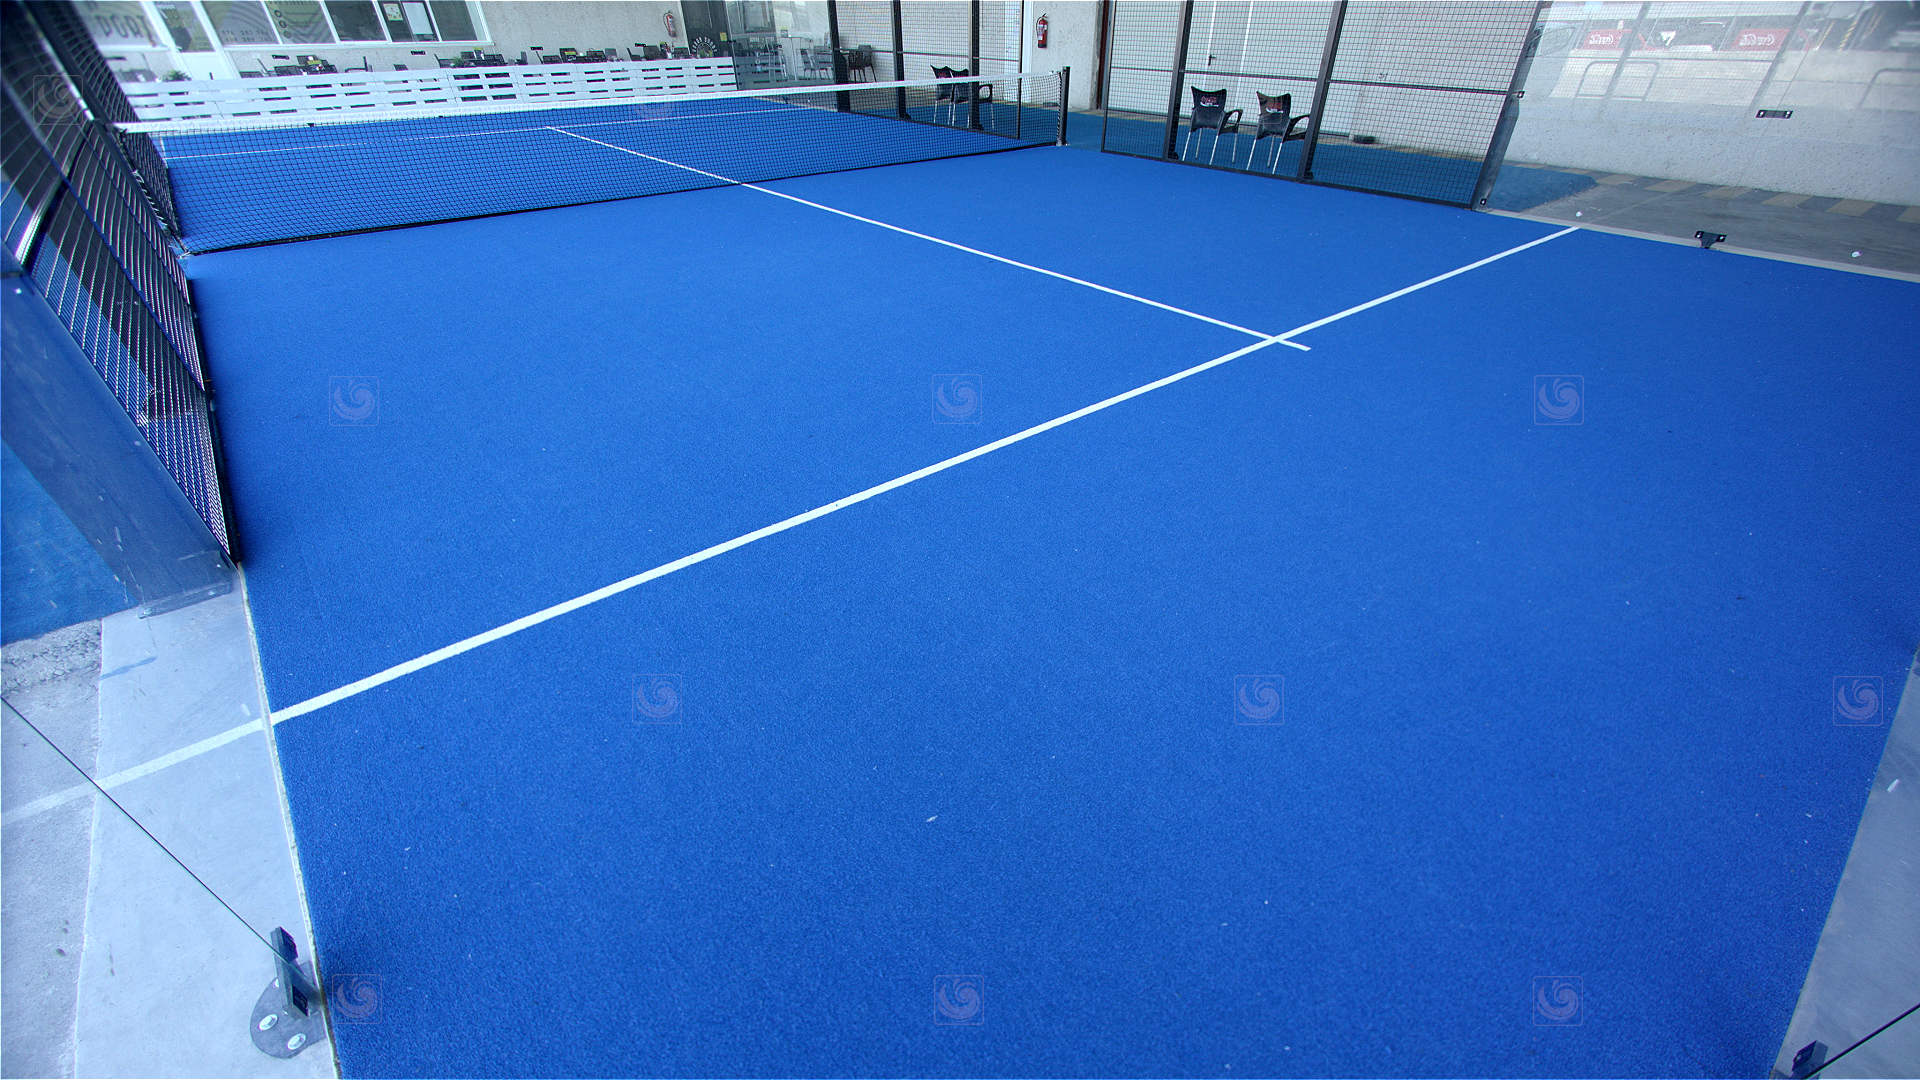 Videoframe showing a Mondo paddle tennis court